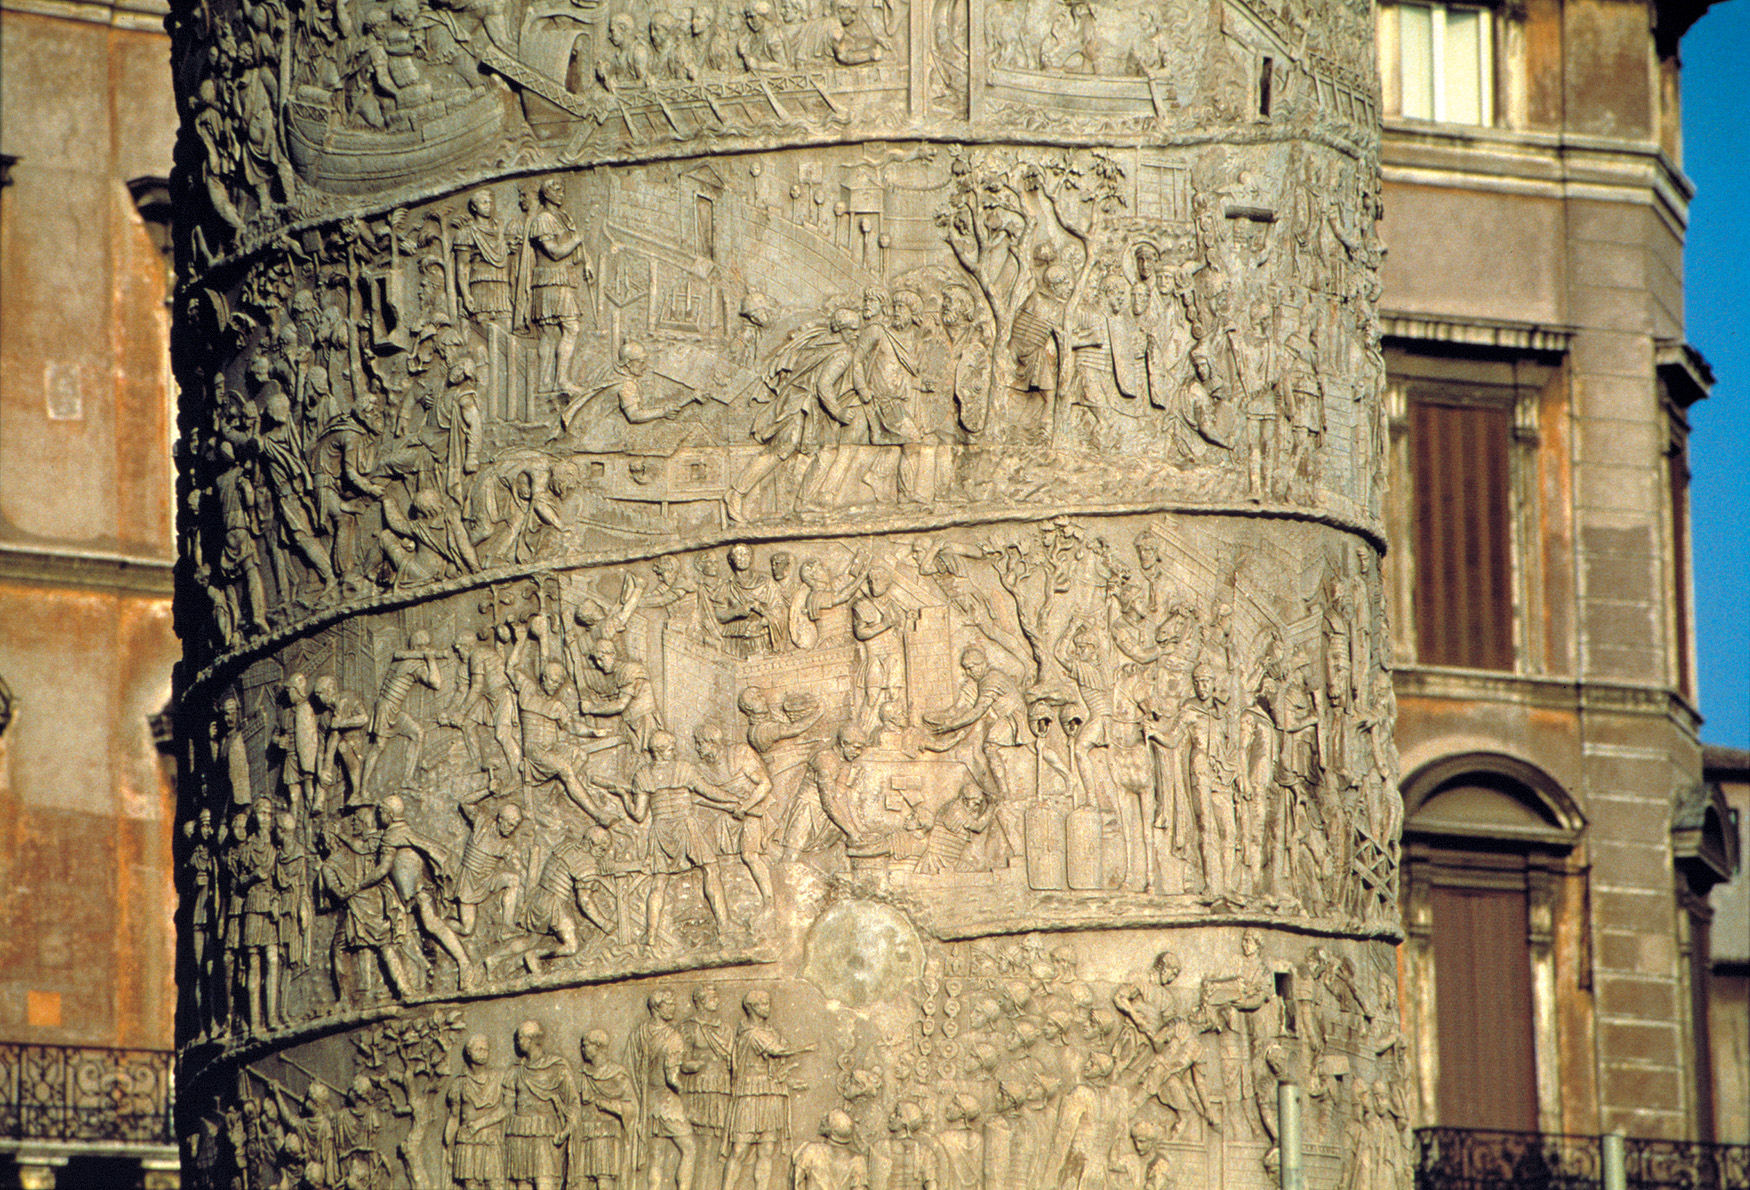 Trajan’s Column, which depicts the emperor’s successes against the Dacians, still stands in Rome.